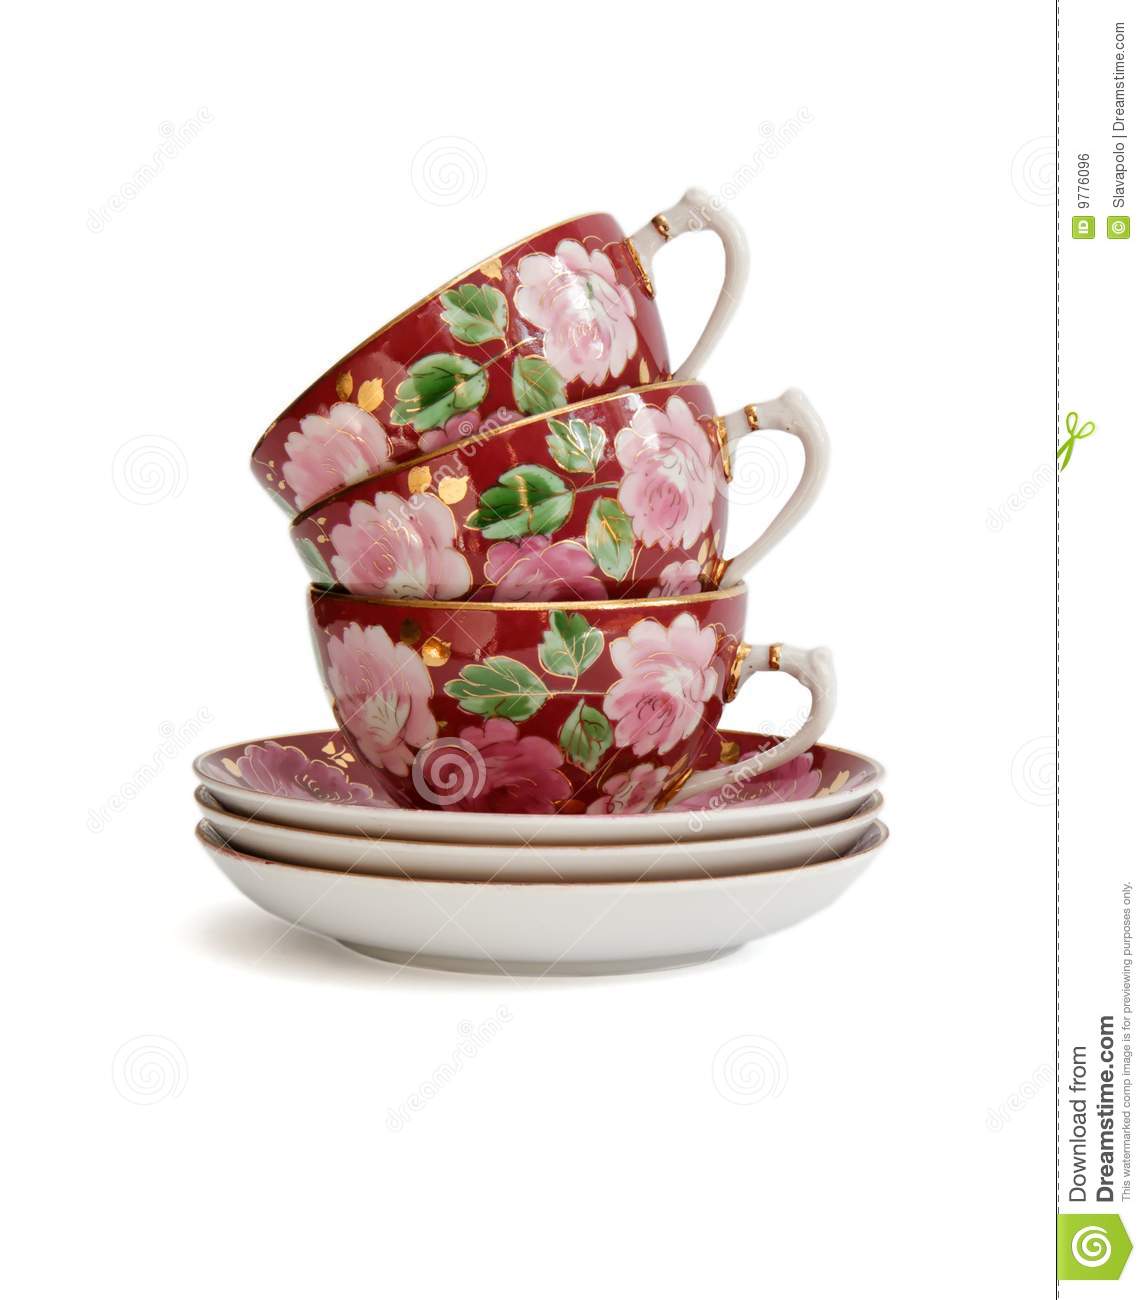 Stack Of Tea Cups With Saucers Royalty Free Stock Image   Image